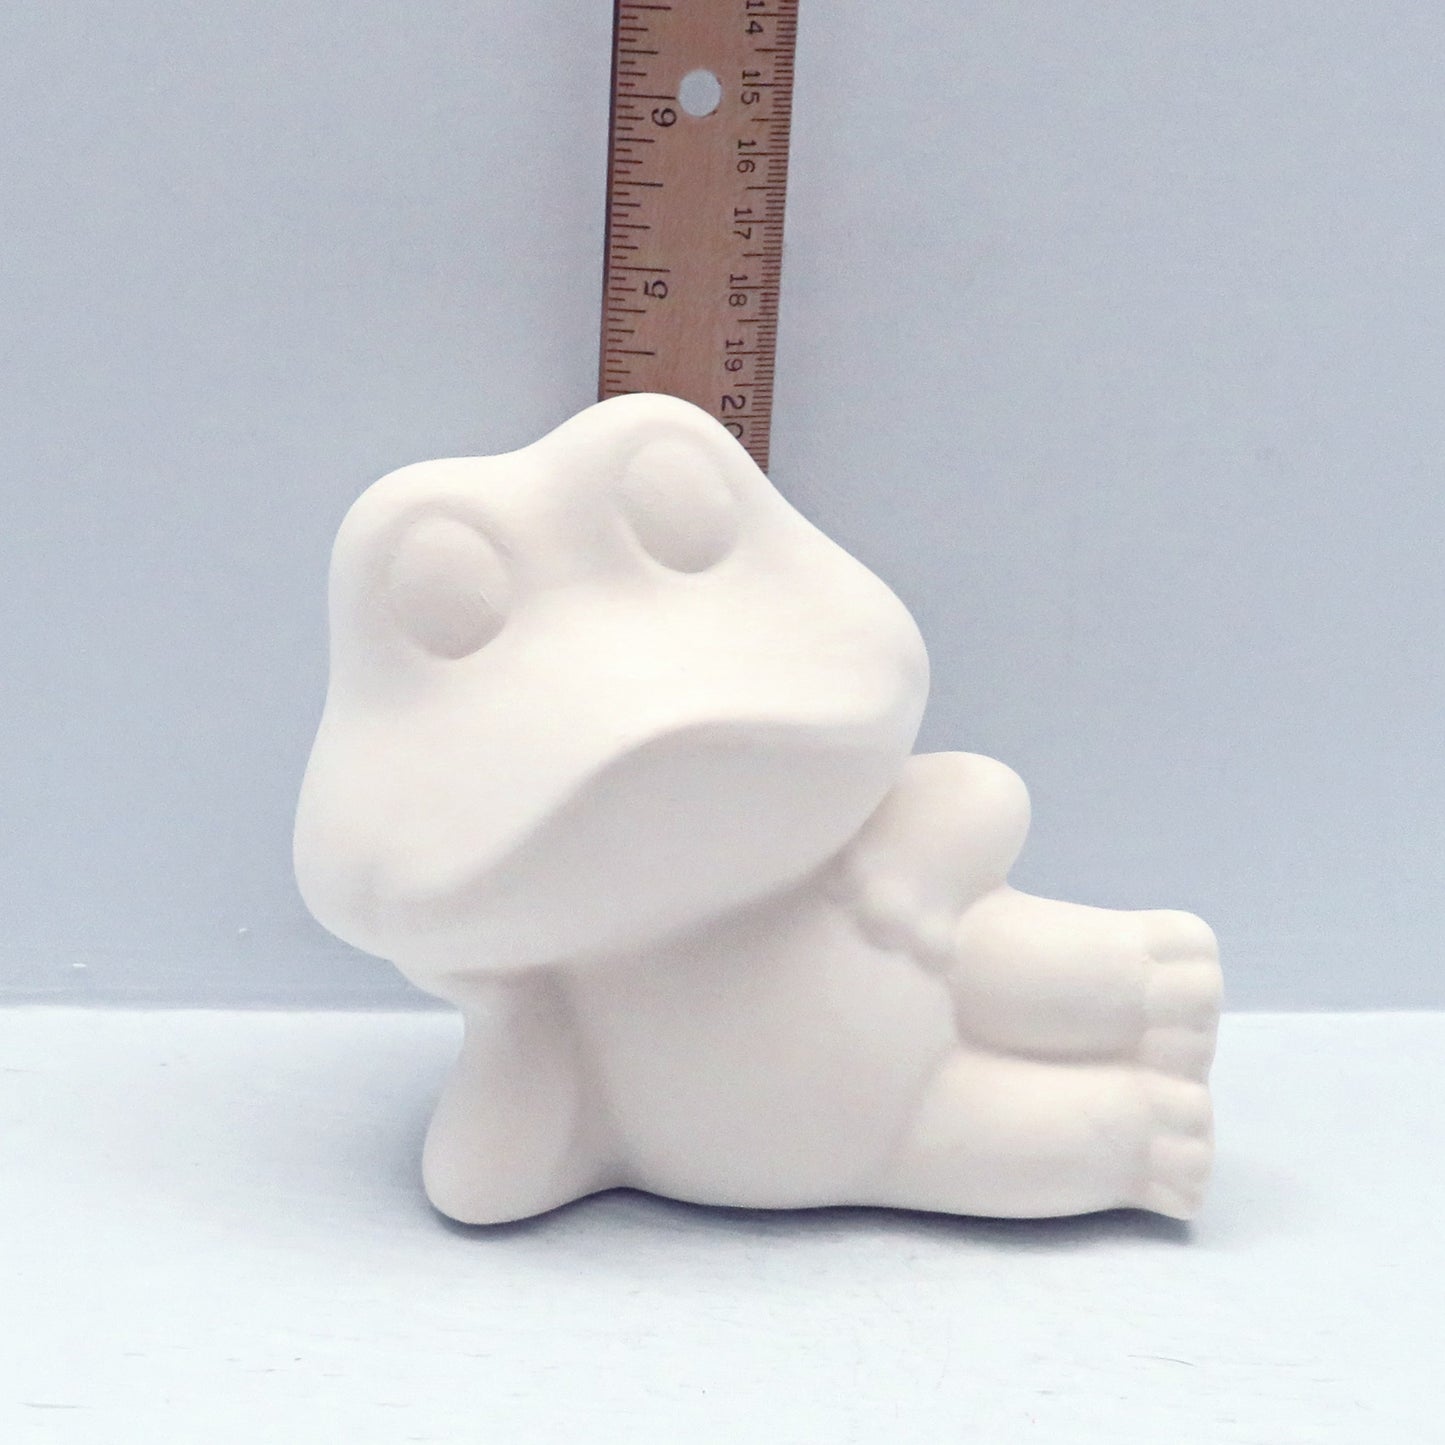 handmade ready to paint ceramic frog lying on his side near a ruler showing it to be just over 4 inches high